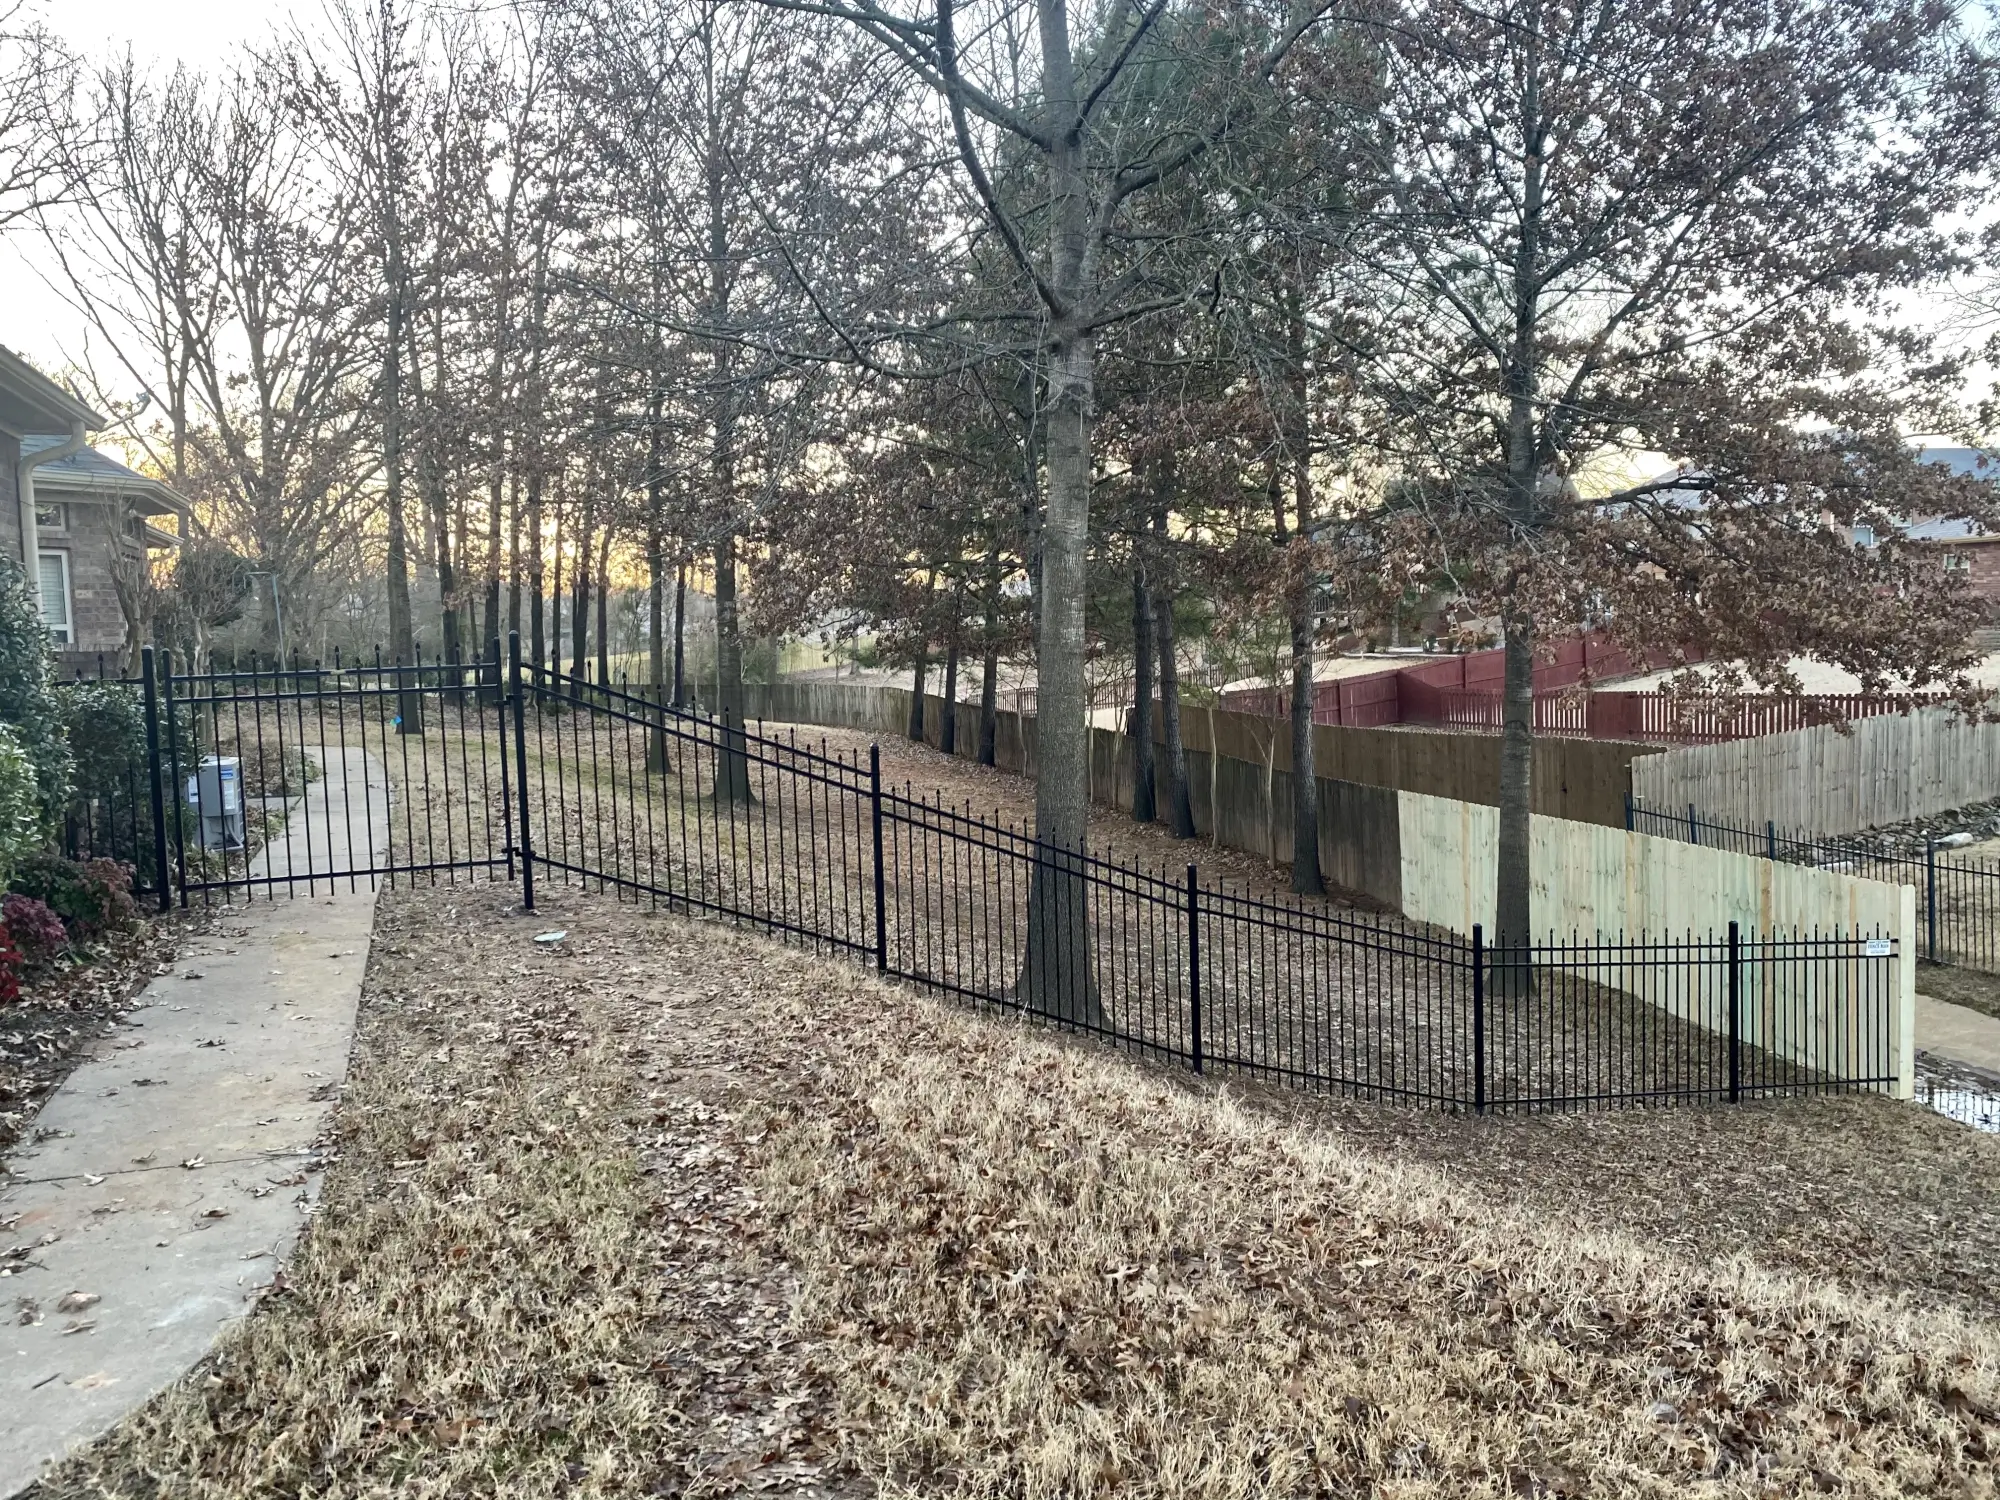 Residential black iron fence connecting to wood fence